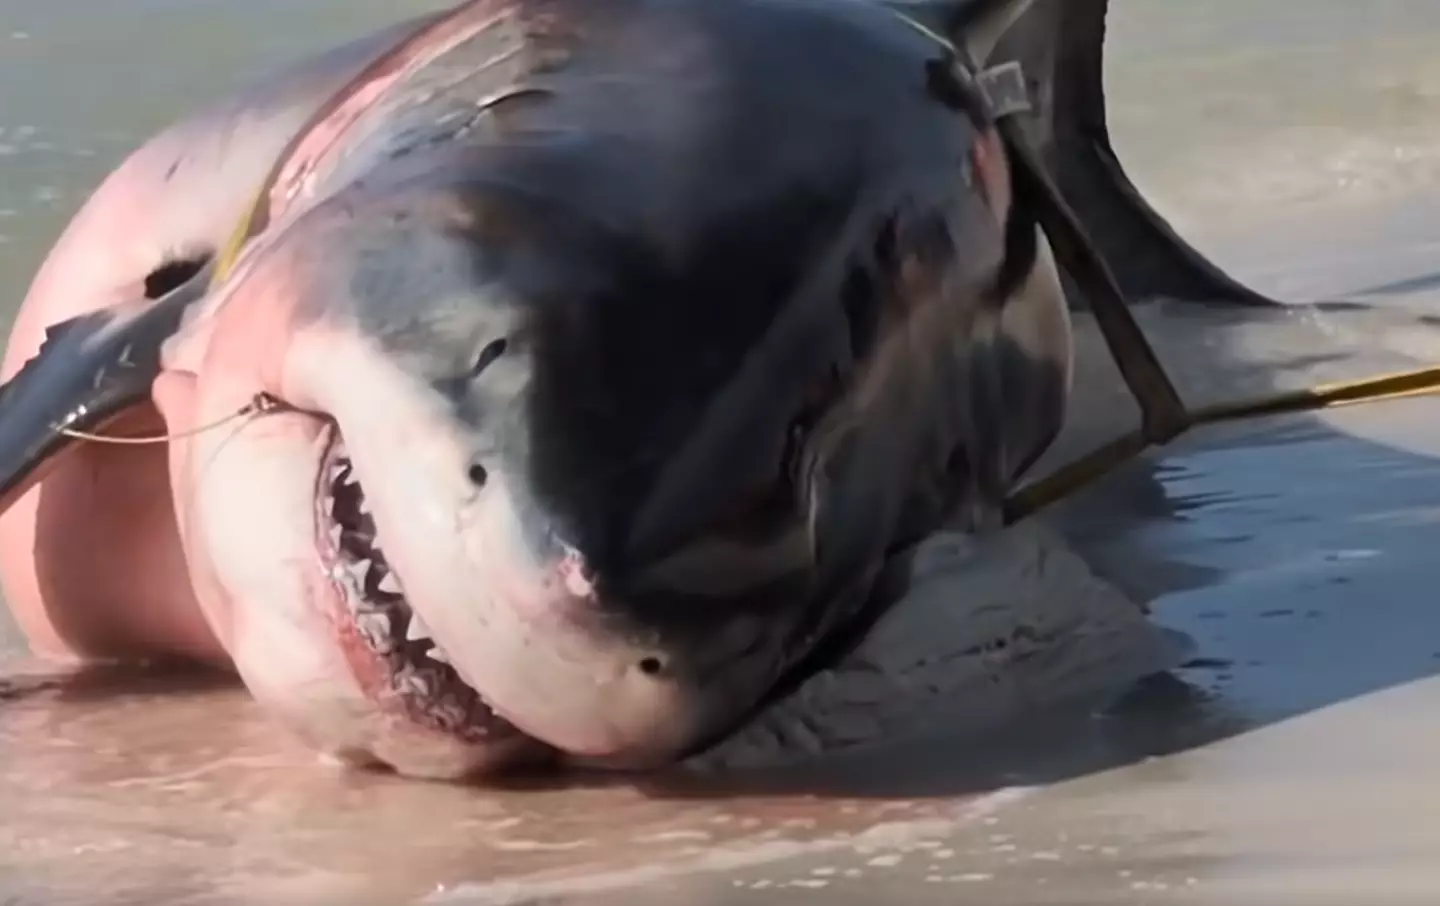 People noticed a sad detail about the dead shark.